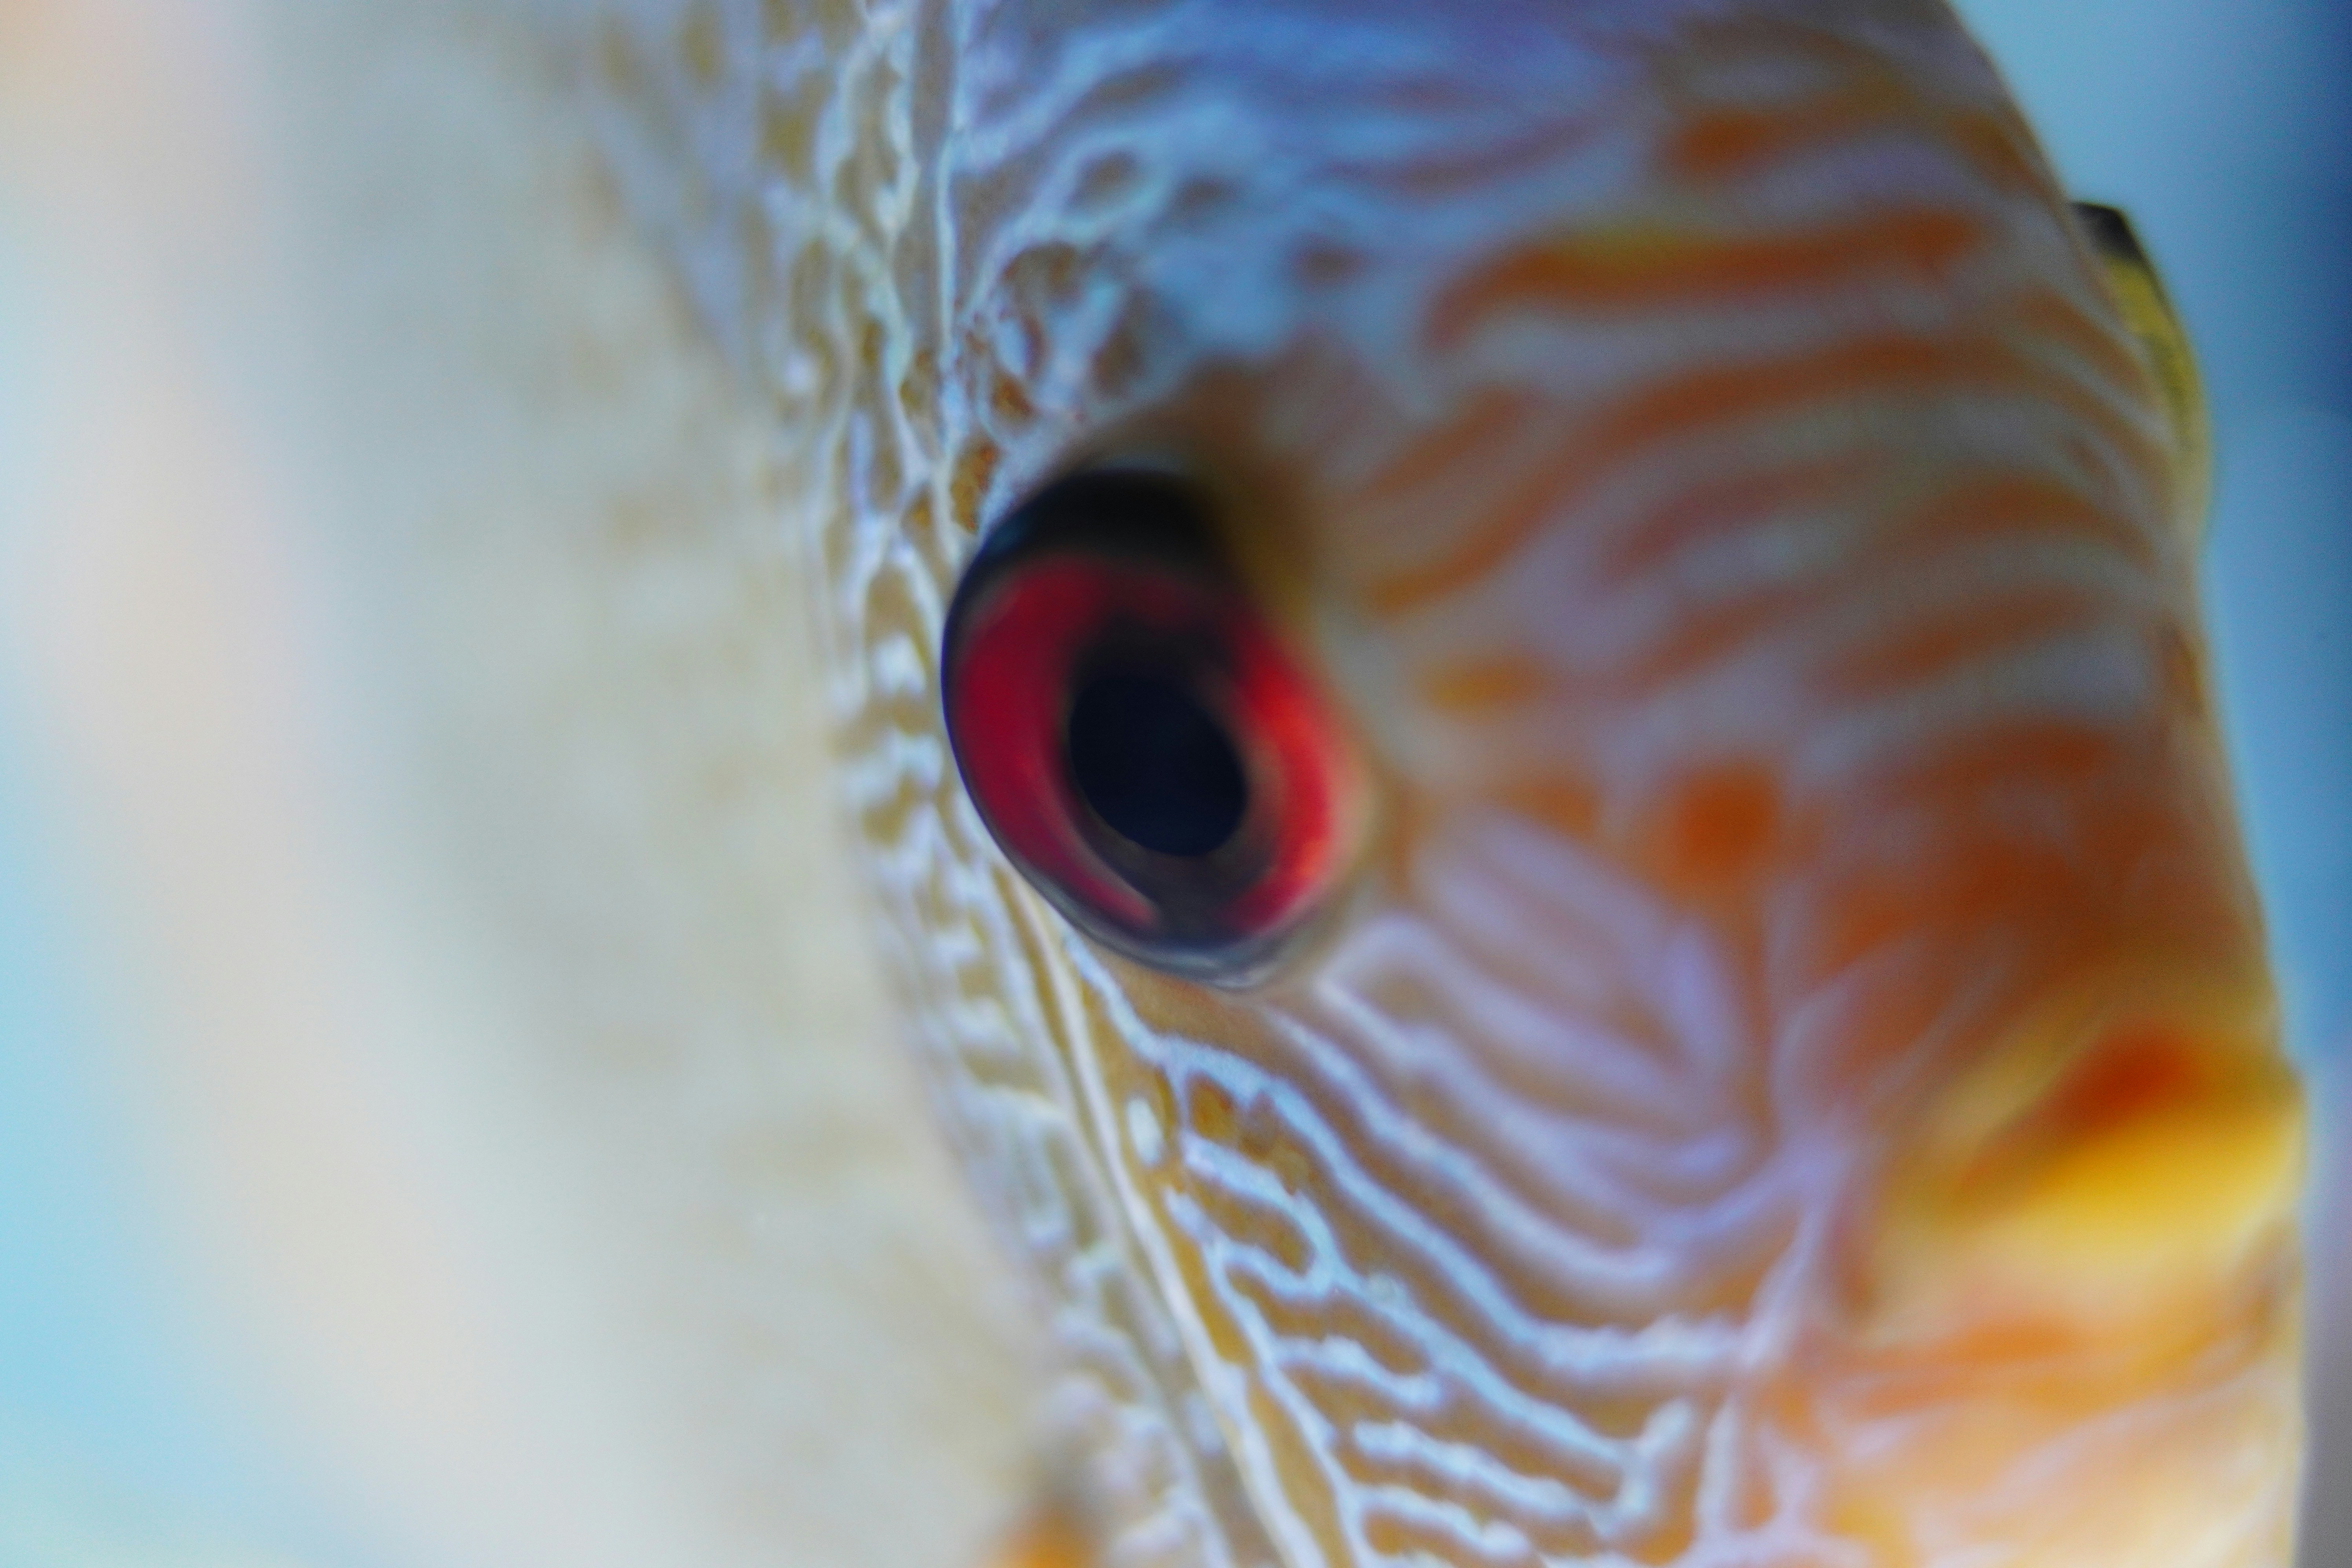 https://www.aquadesk.com/gallery/efishient Discus tropical fish from amazon river close up shot